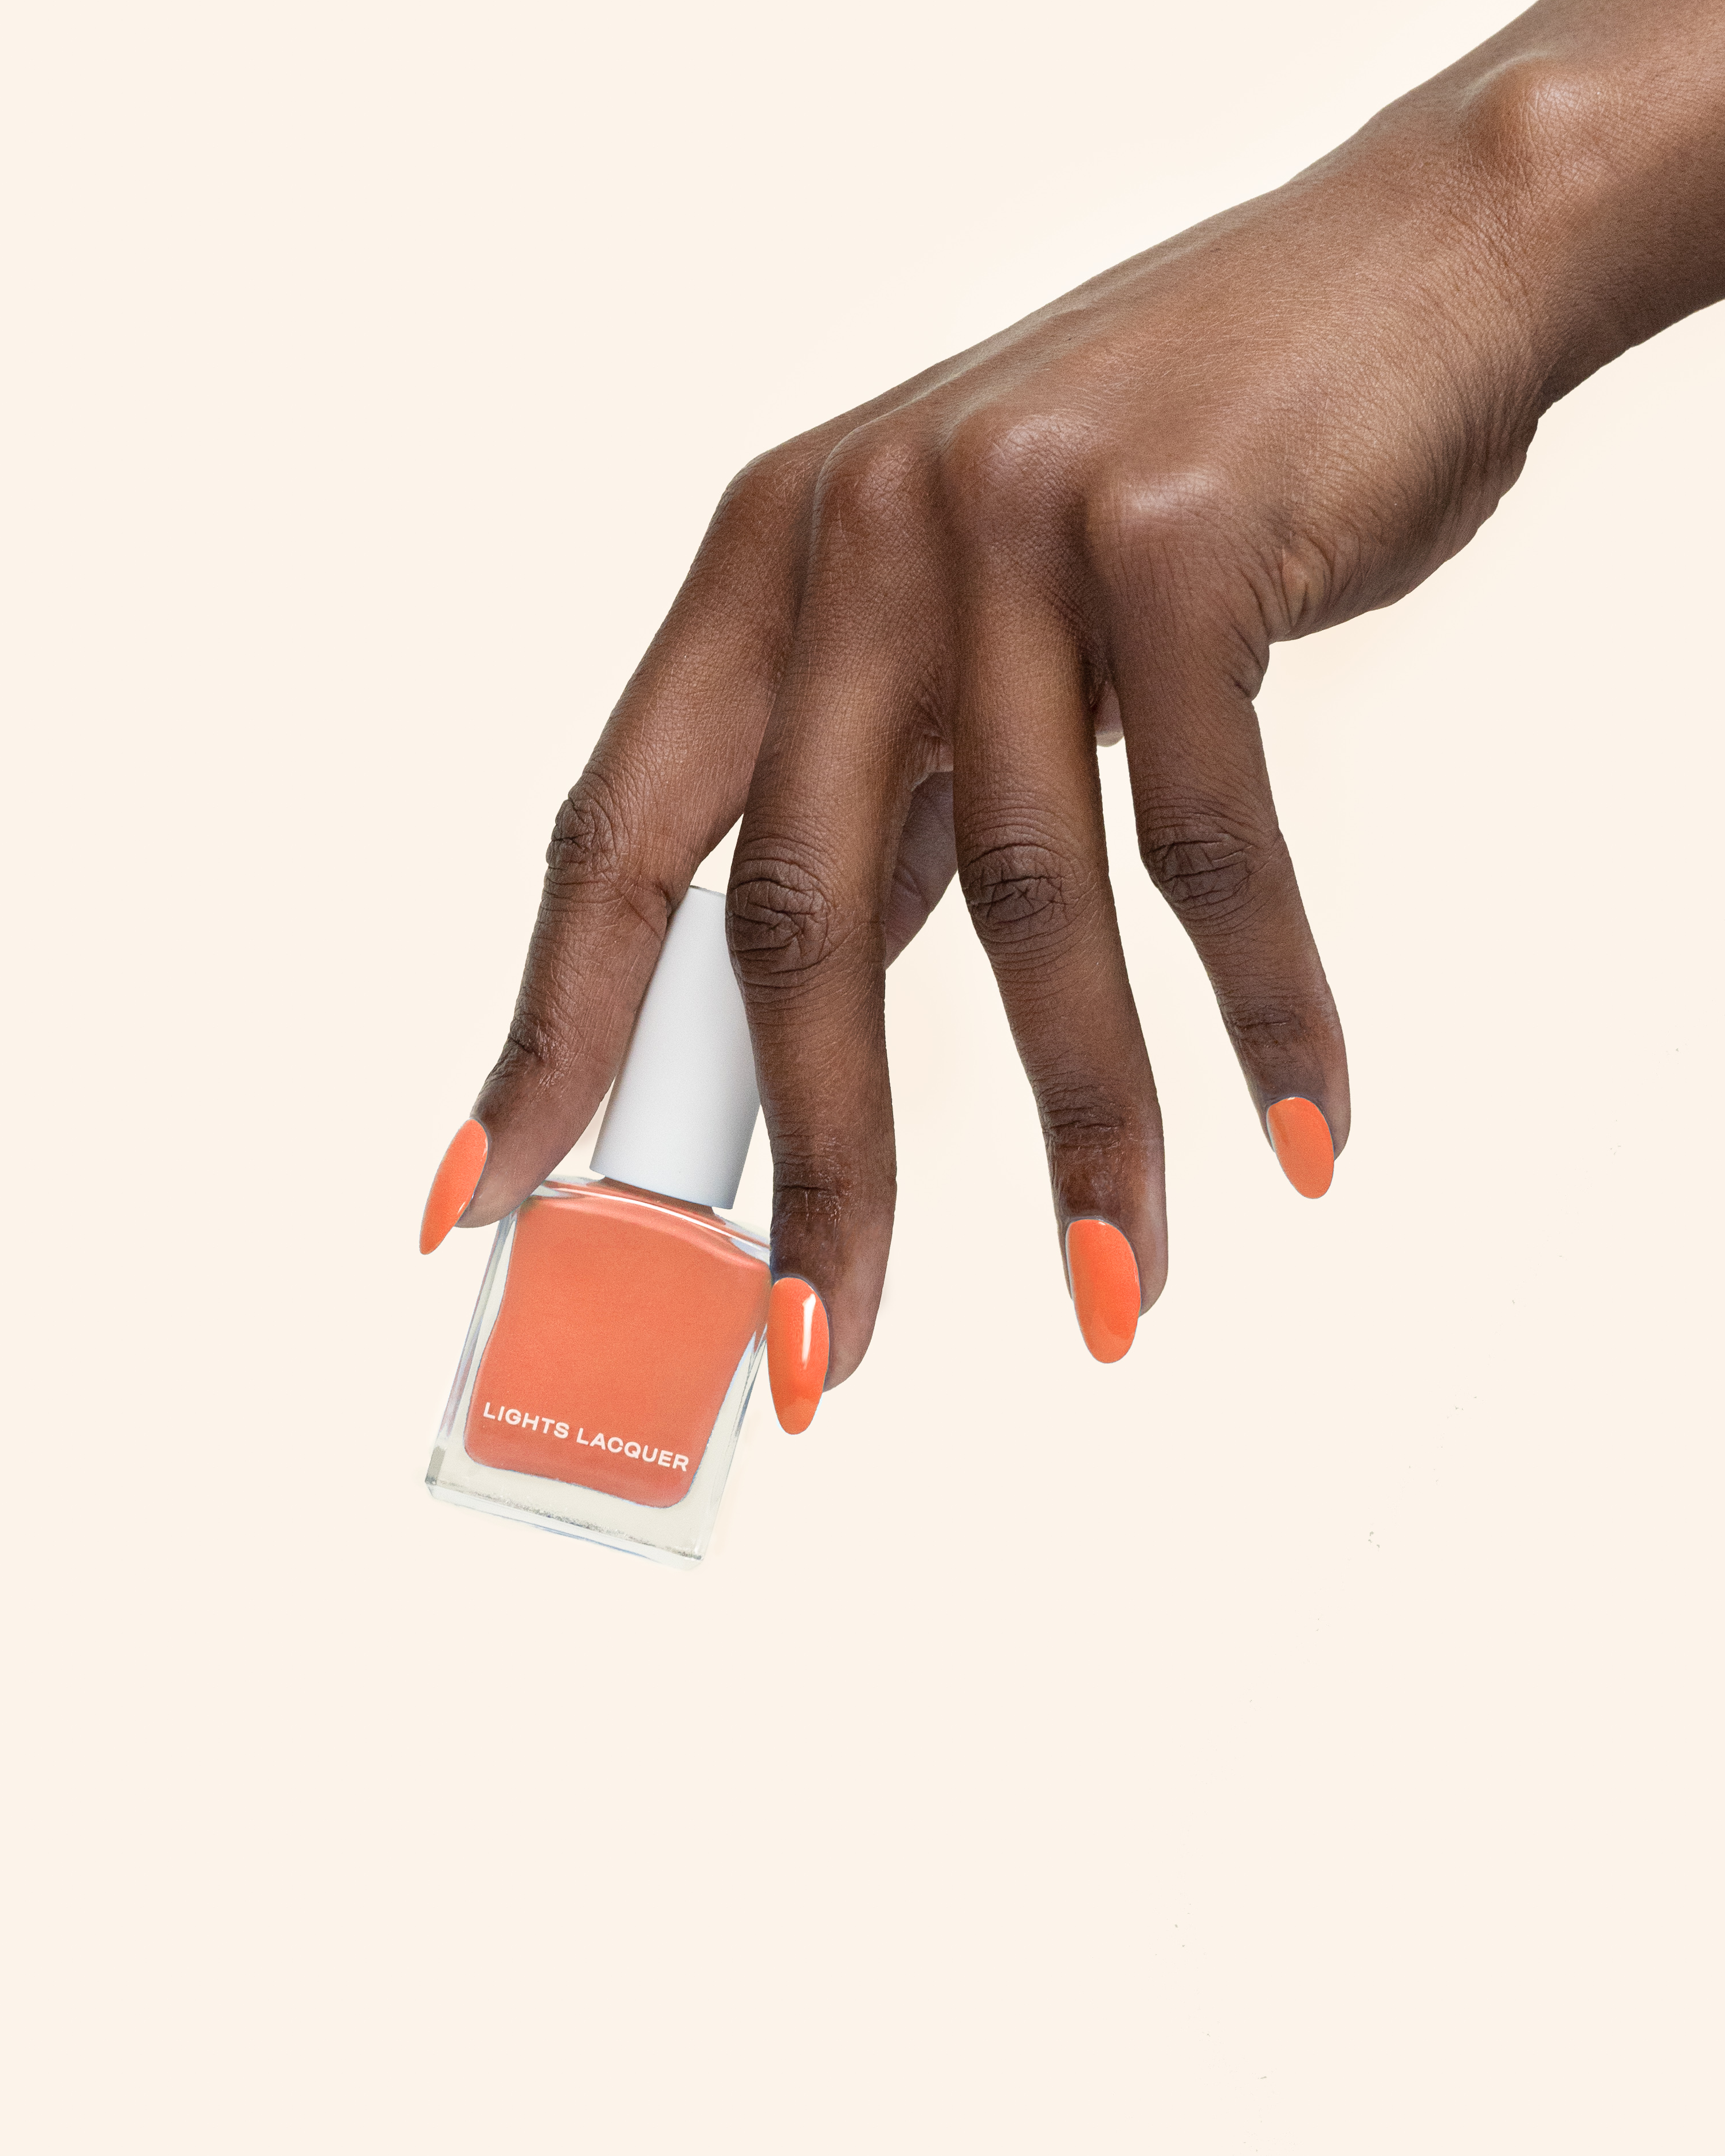 Lights Lacquer - Mamey